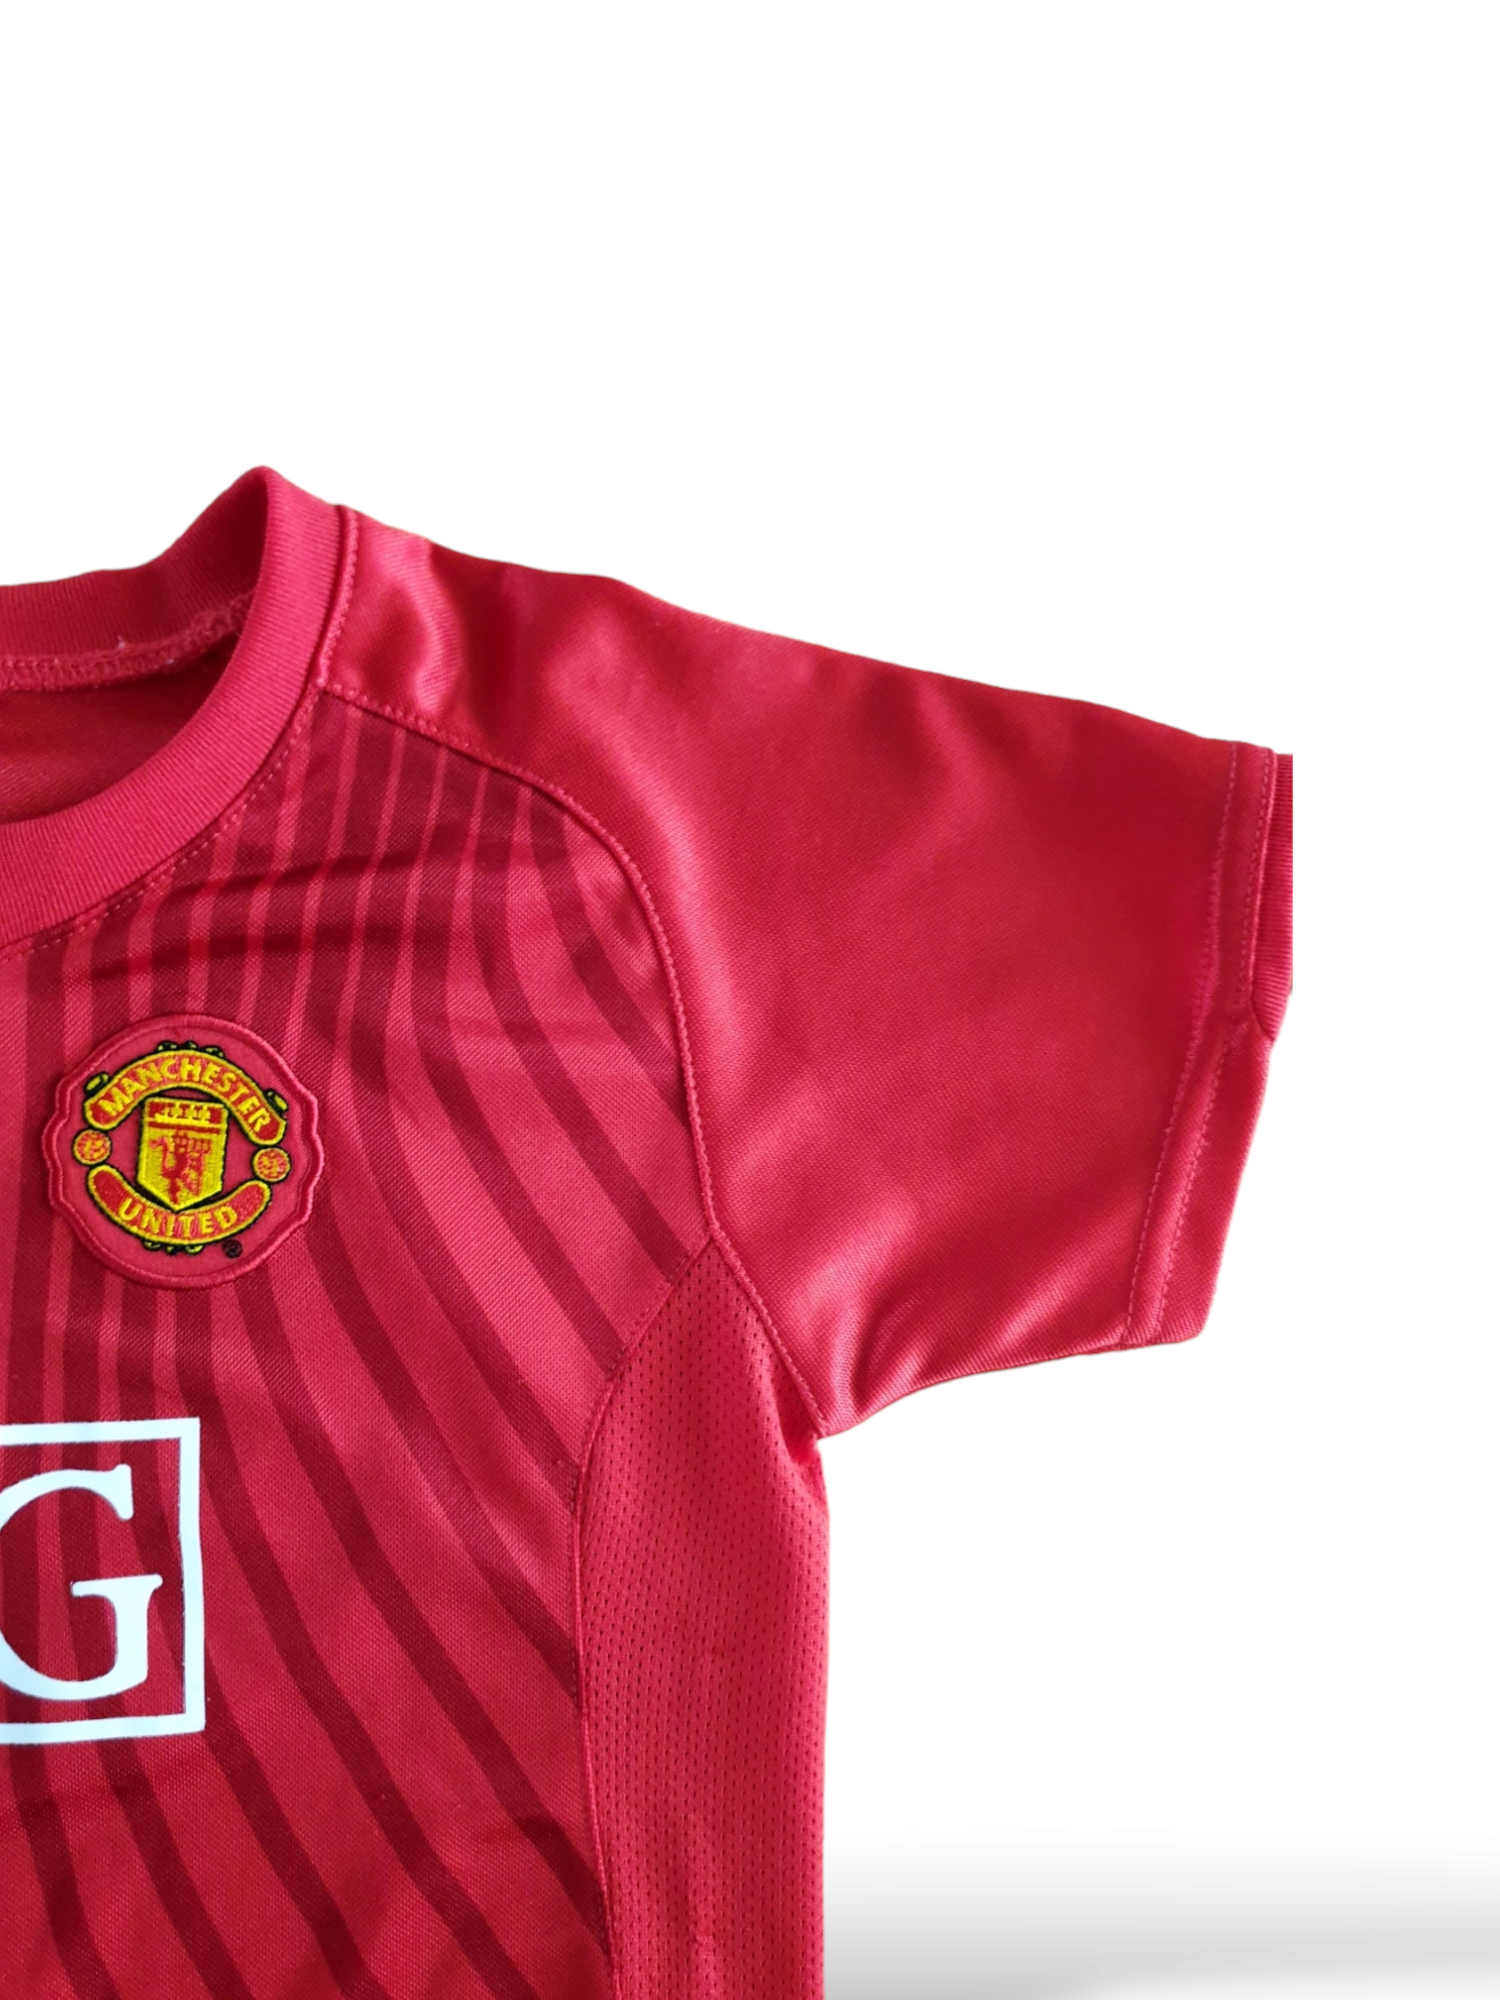 manchester united maillot 2007